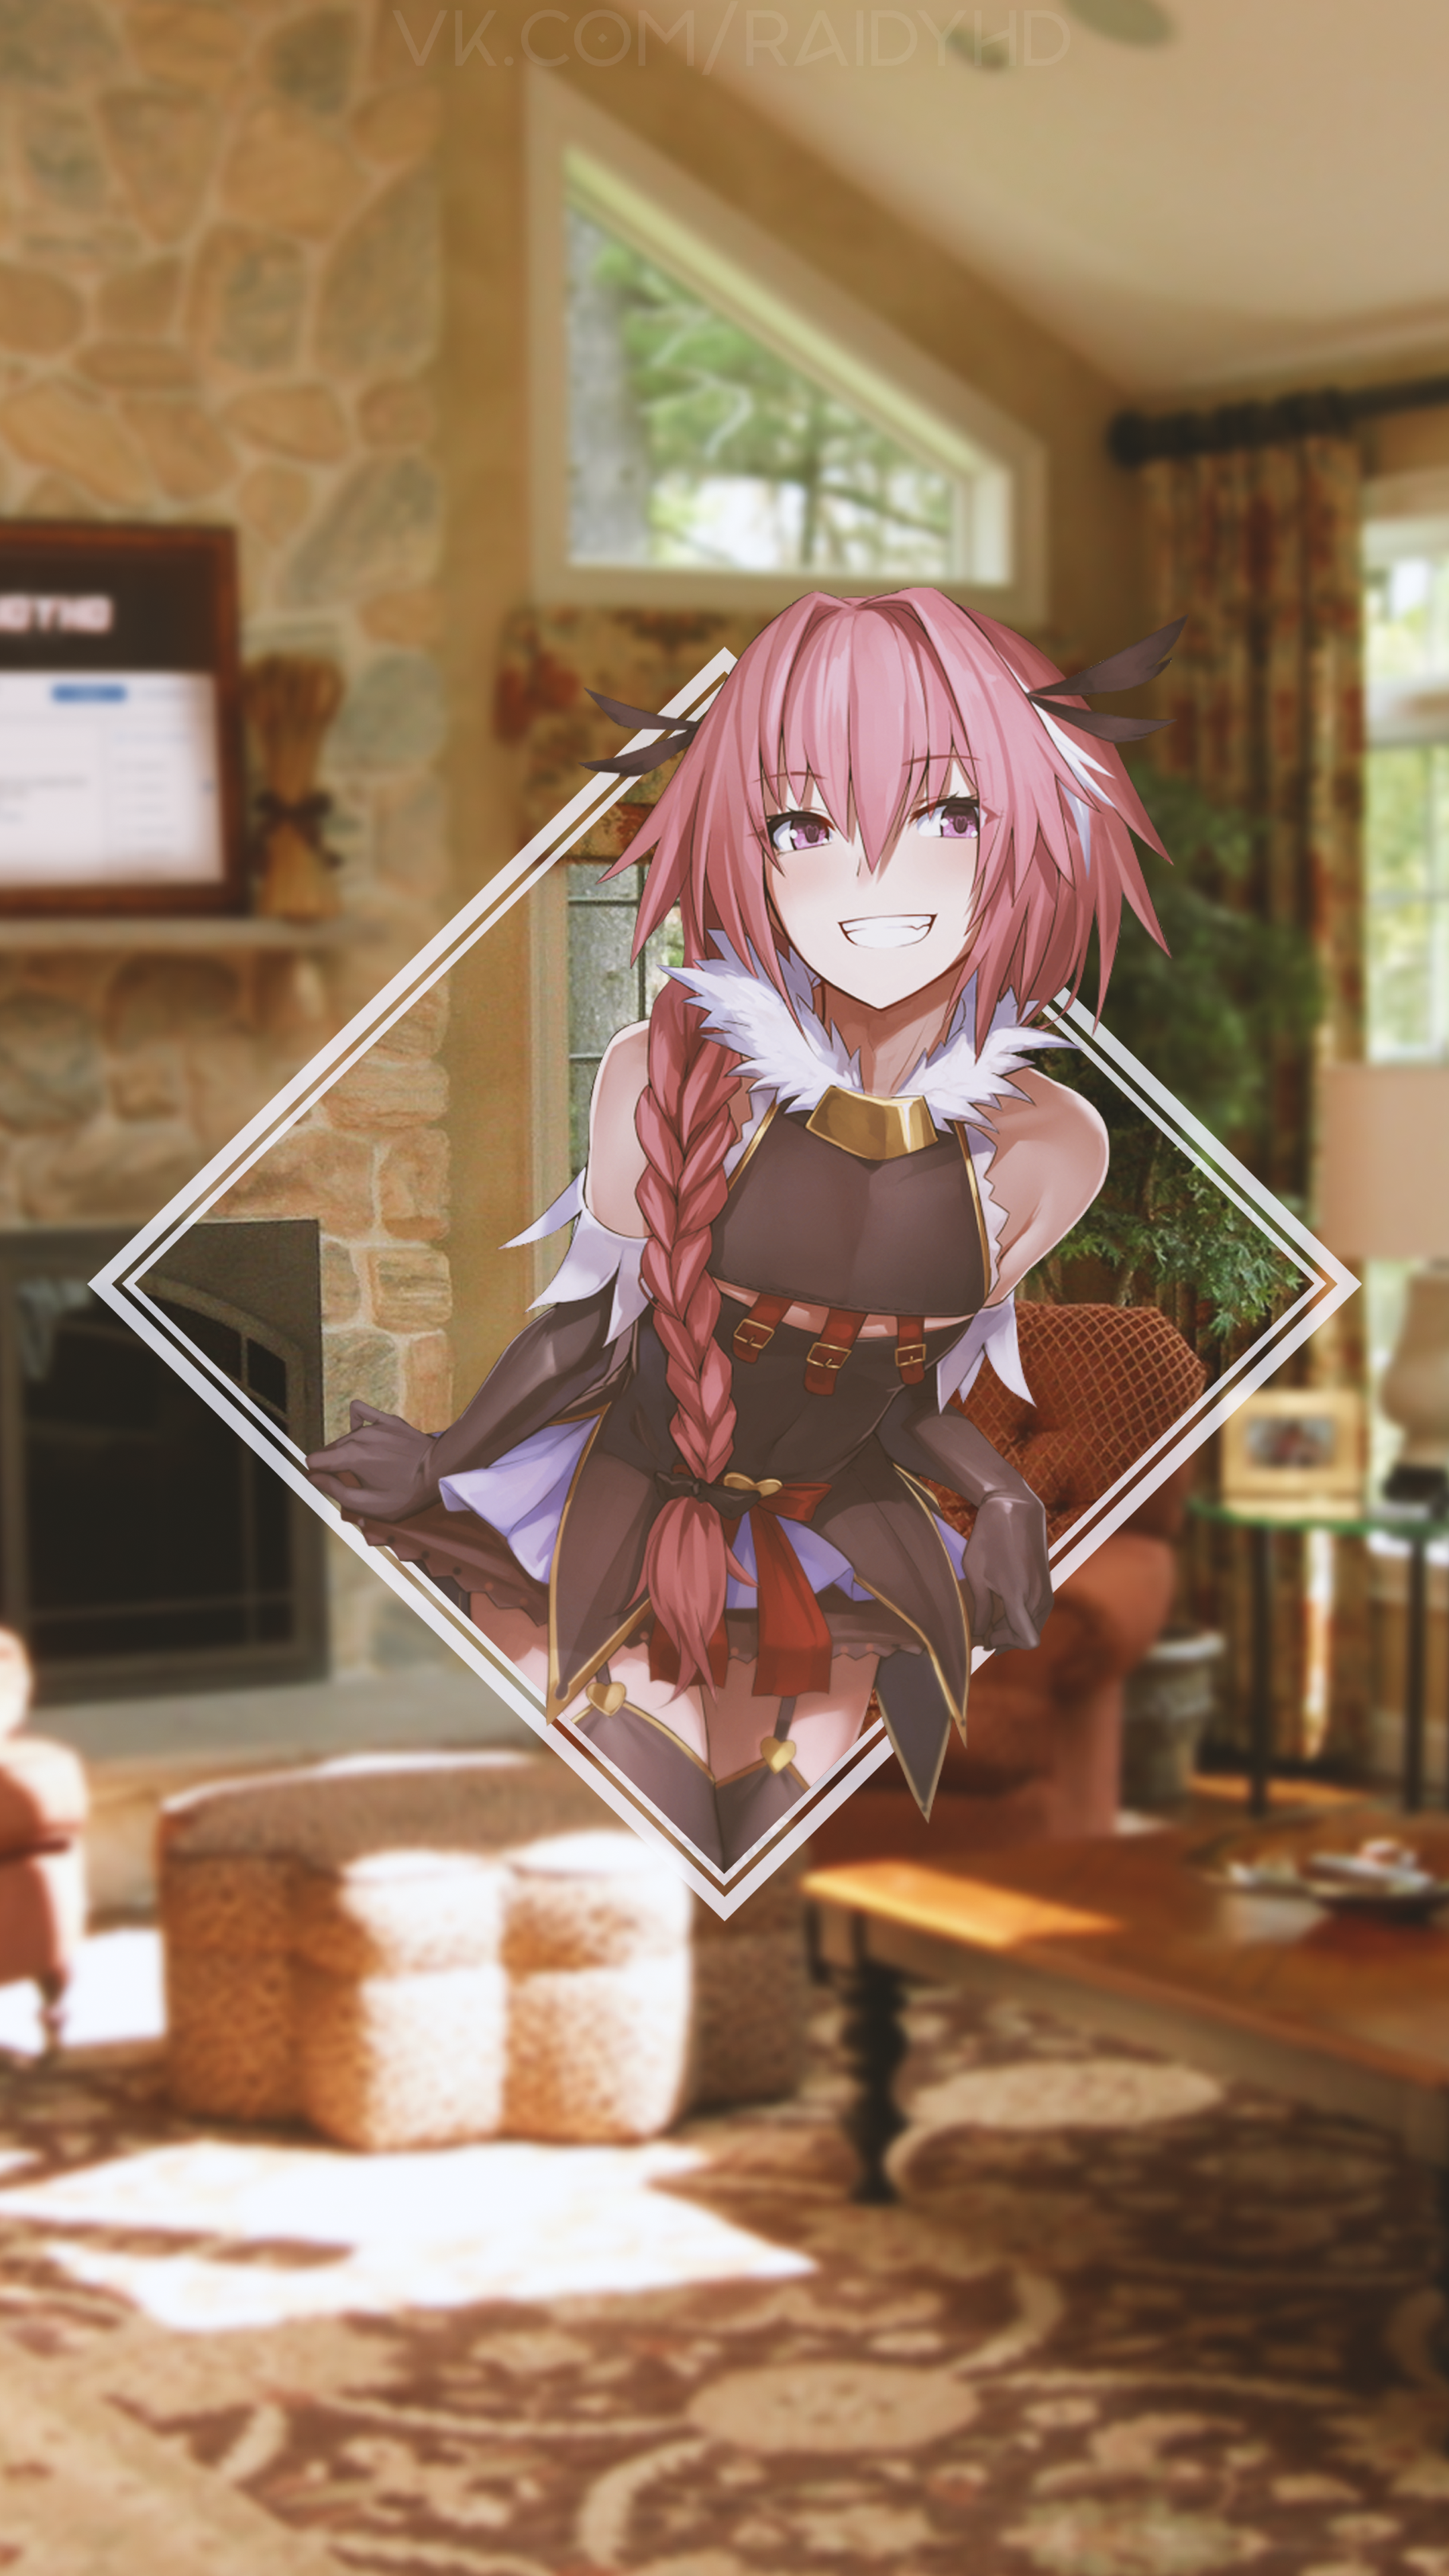 Anime 2160x3840 anime anime boys picture-in-picture Fate/Grand Order Astolfo (Fate/Apocrypha) femboy